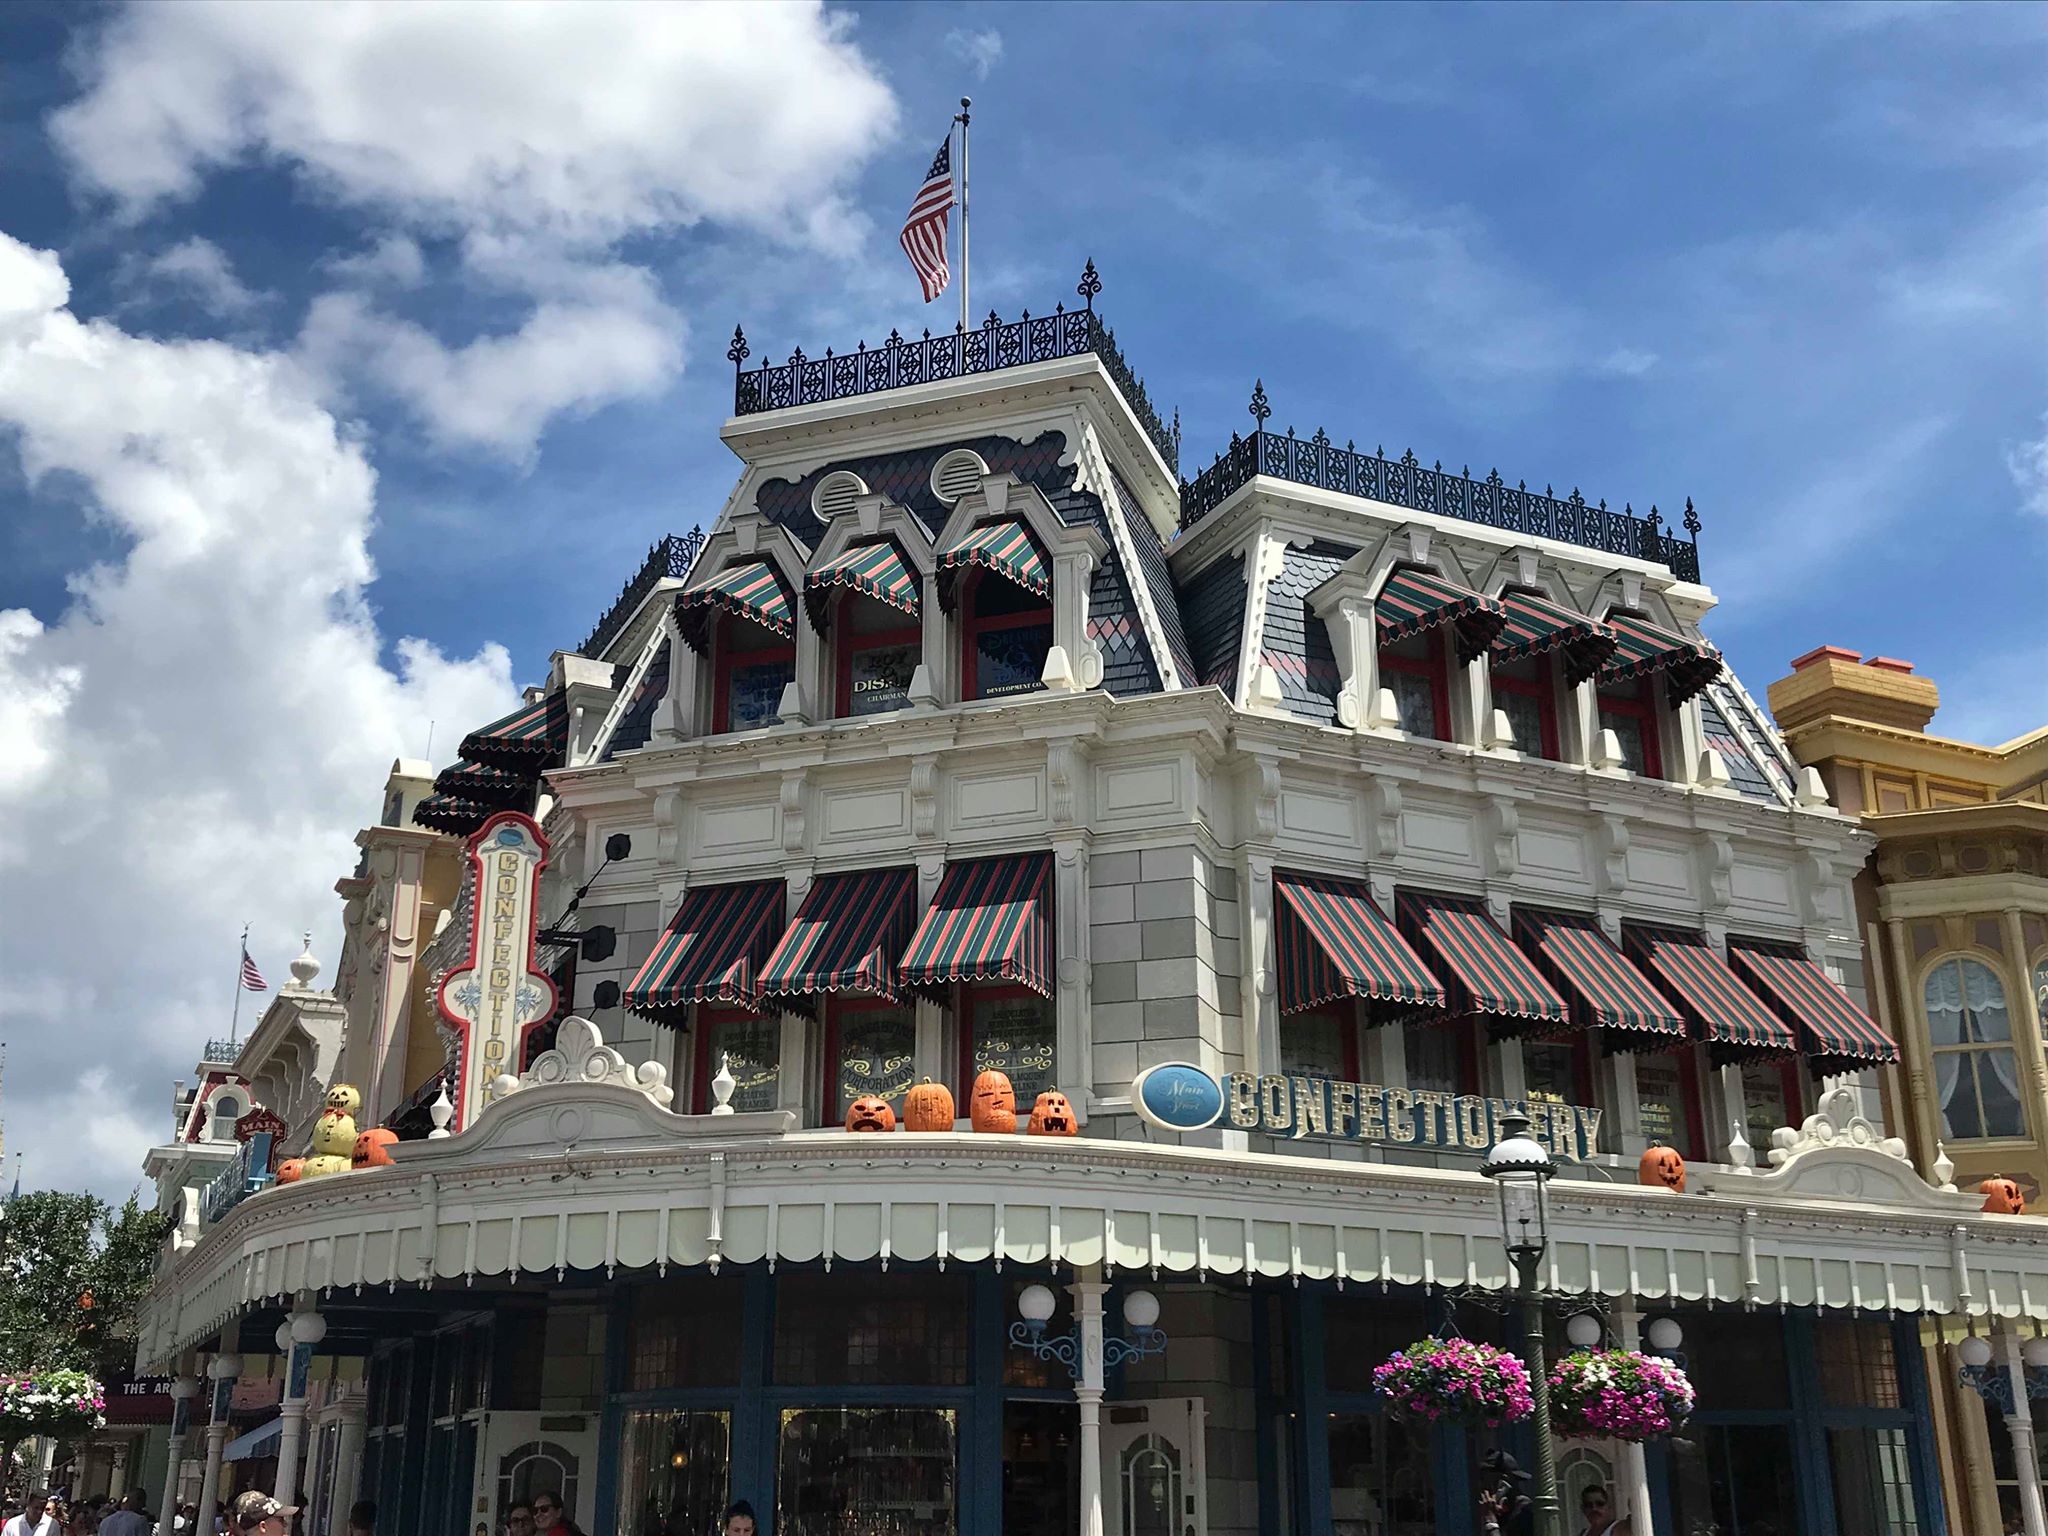 Halloween Decorations Have Started To Go Up At Magic Kingdom!